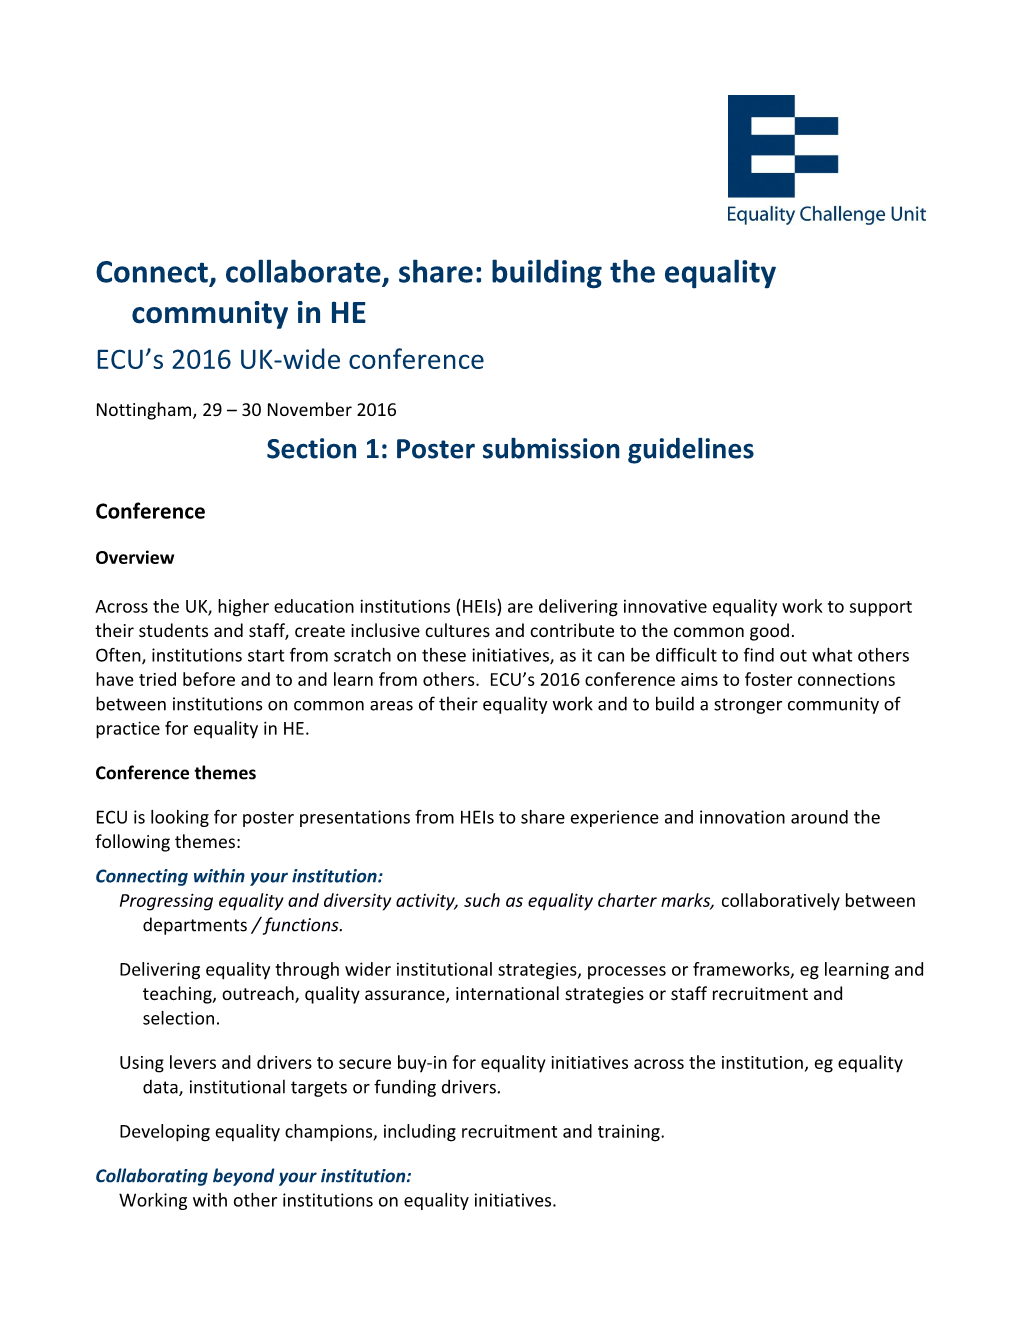 Connect, Collaborate, Share: Building the Equality Community in HE